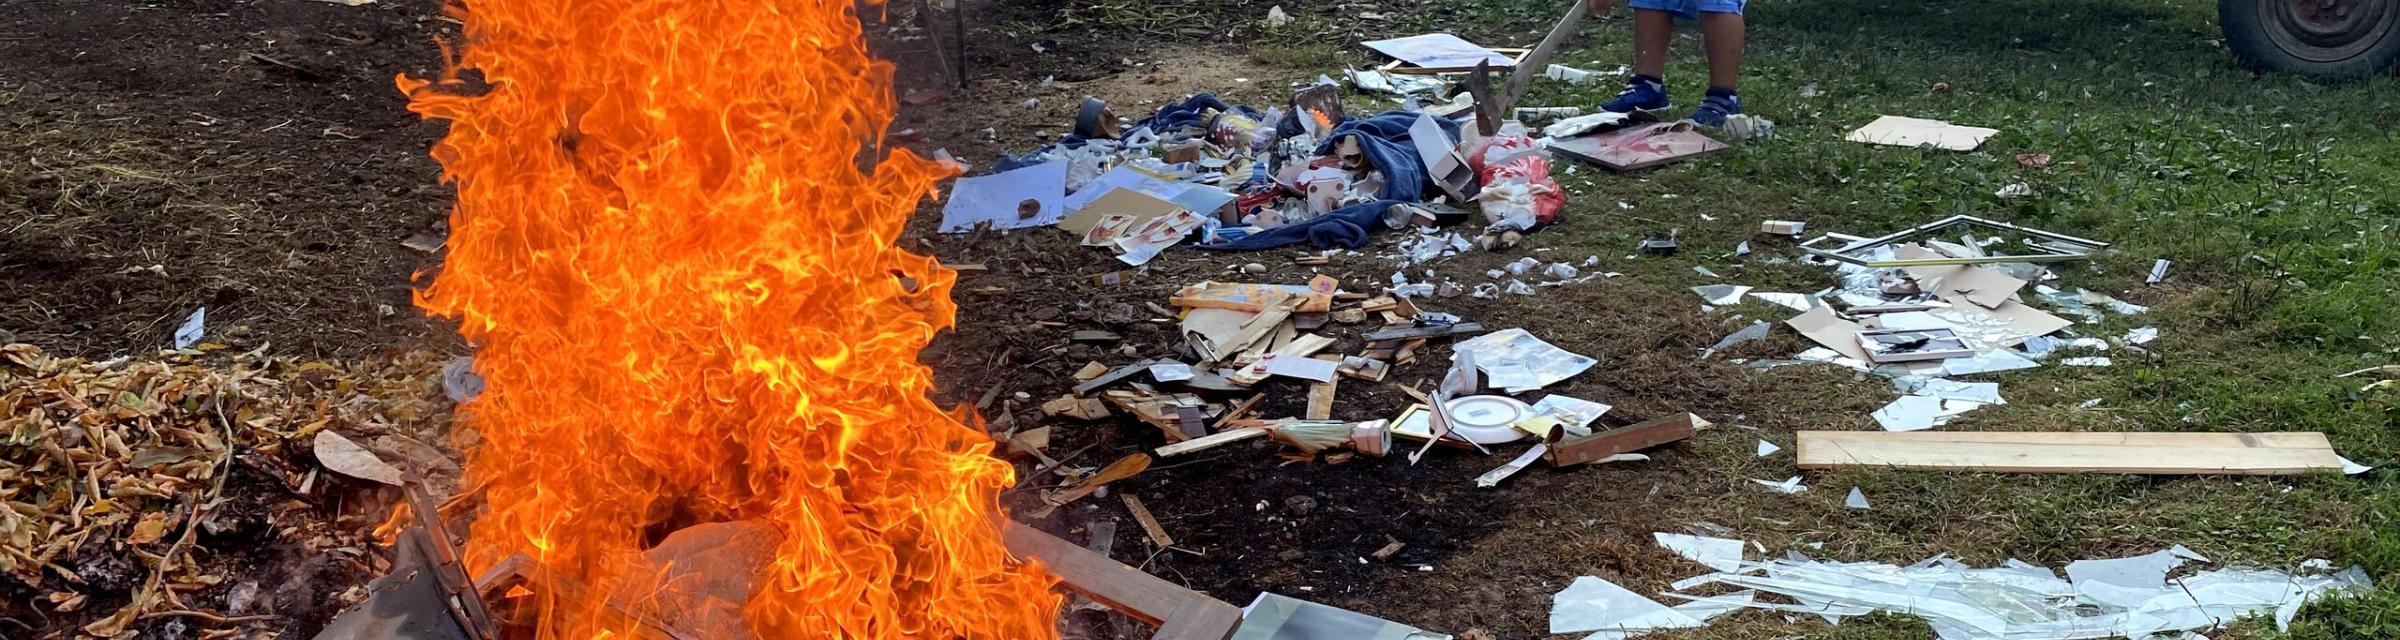 Bonfire used to destroy occult items